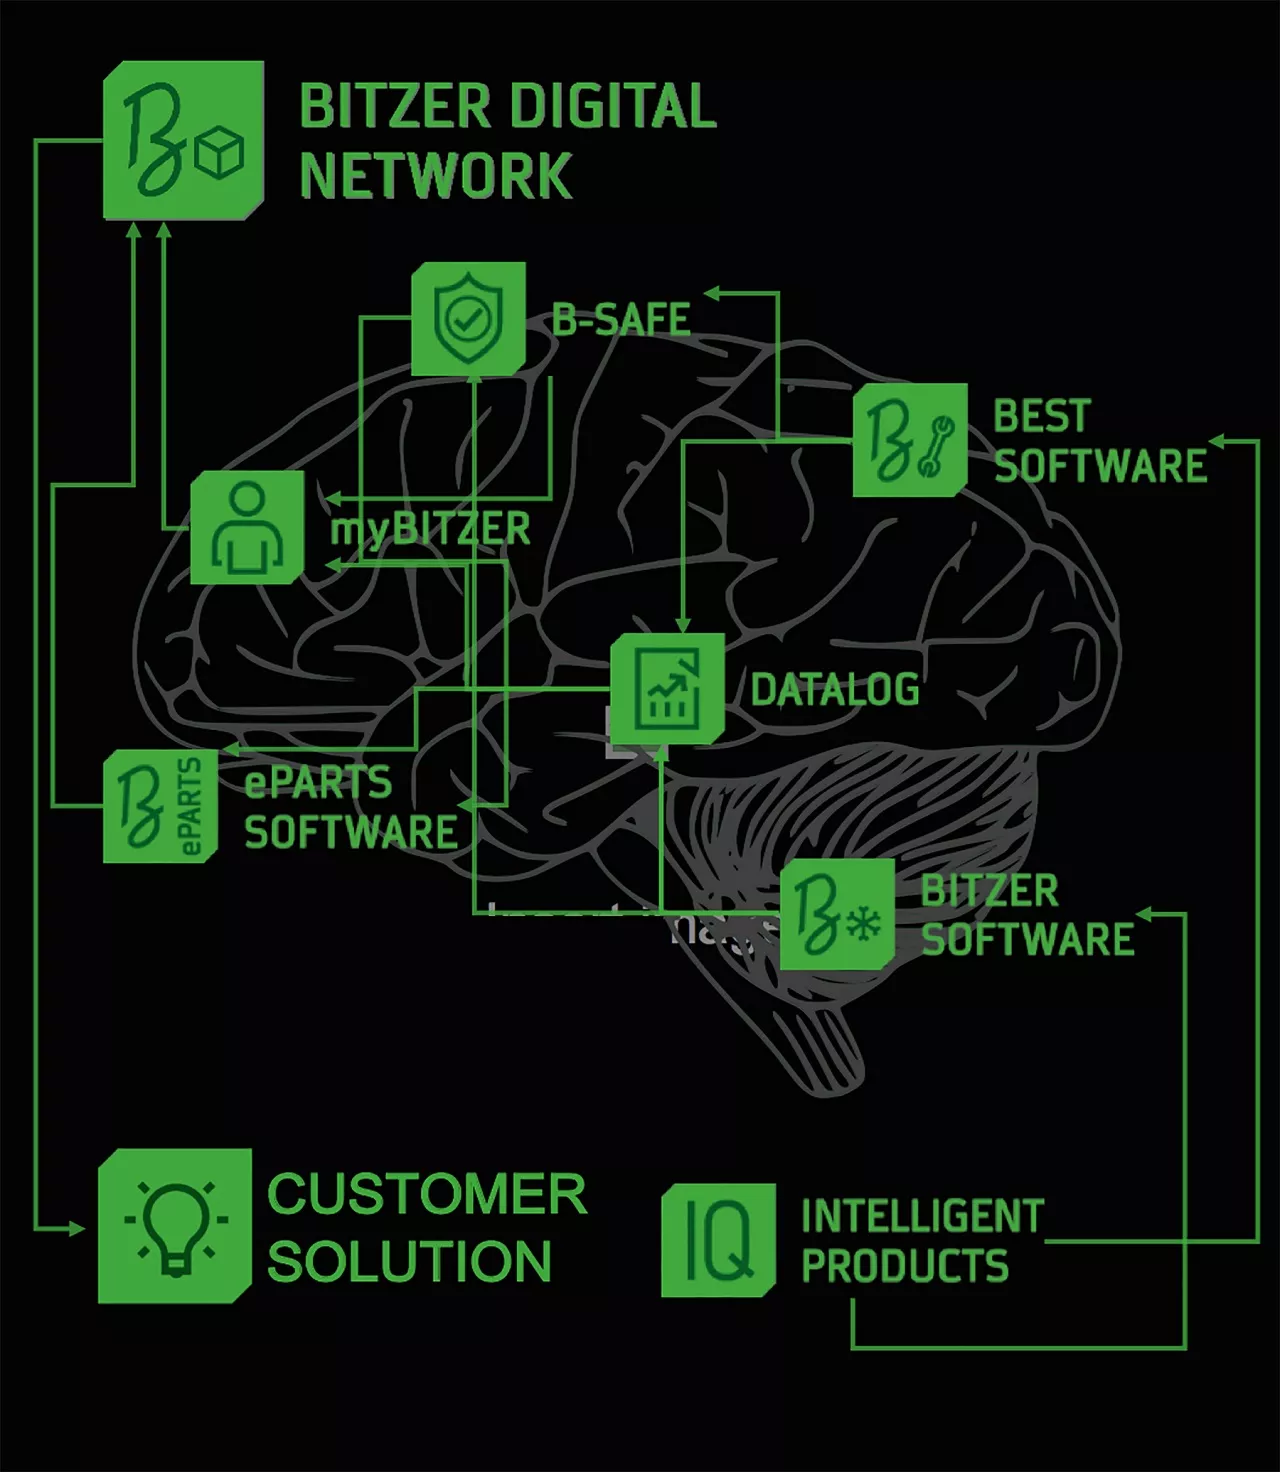 BITZER UK has introduced a new range of digital customer services 